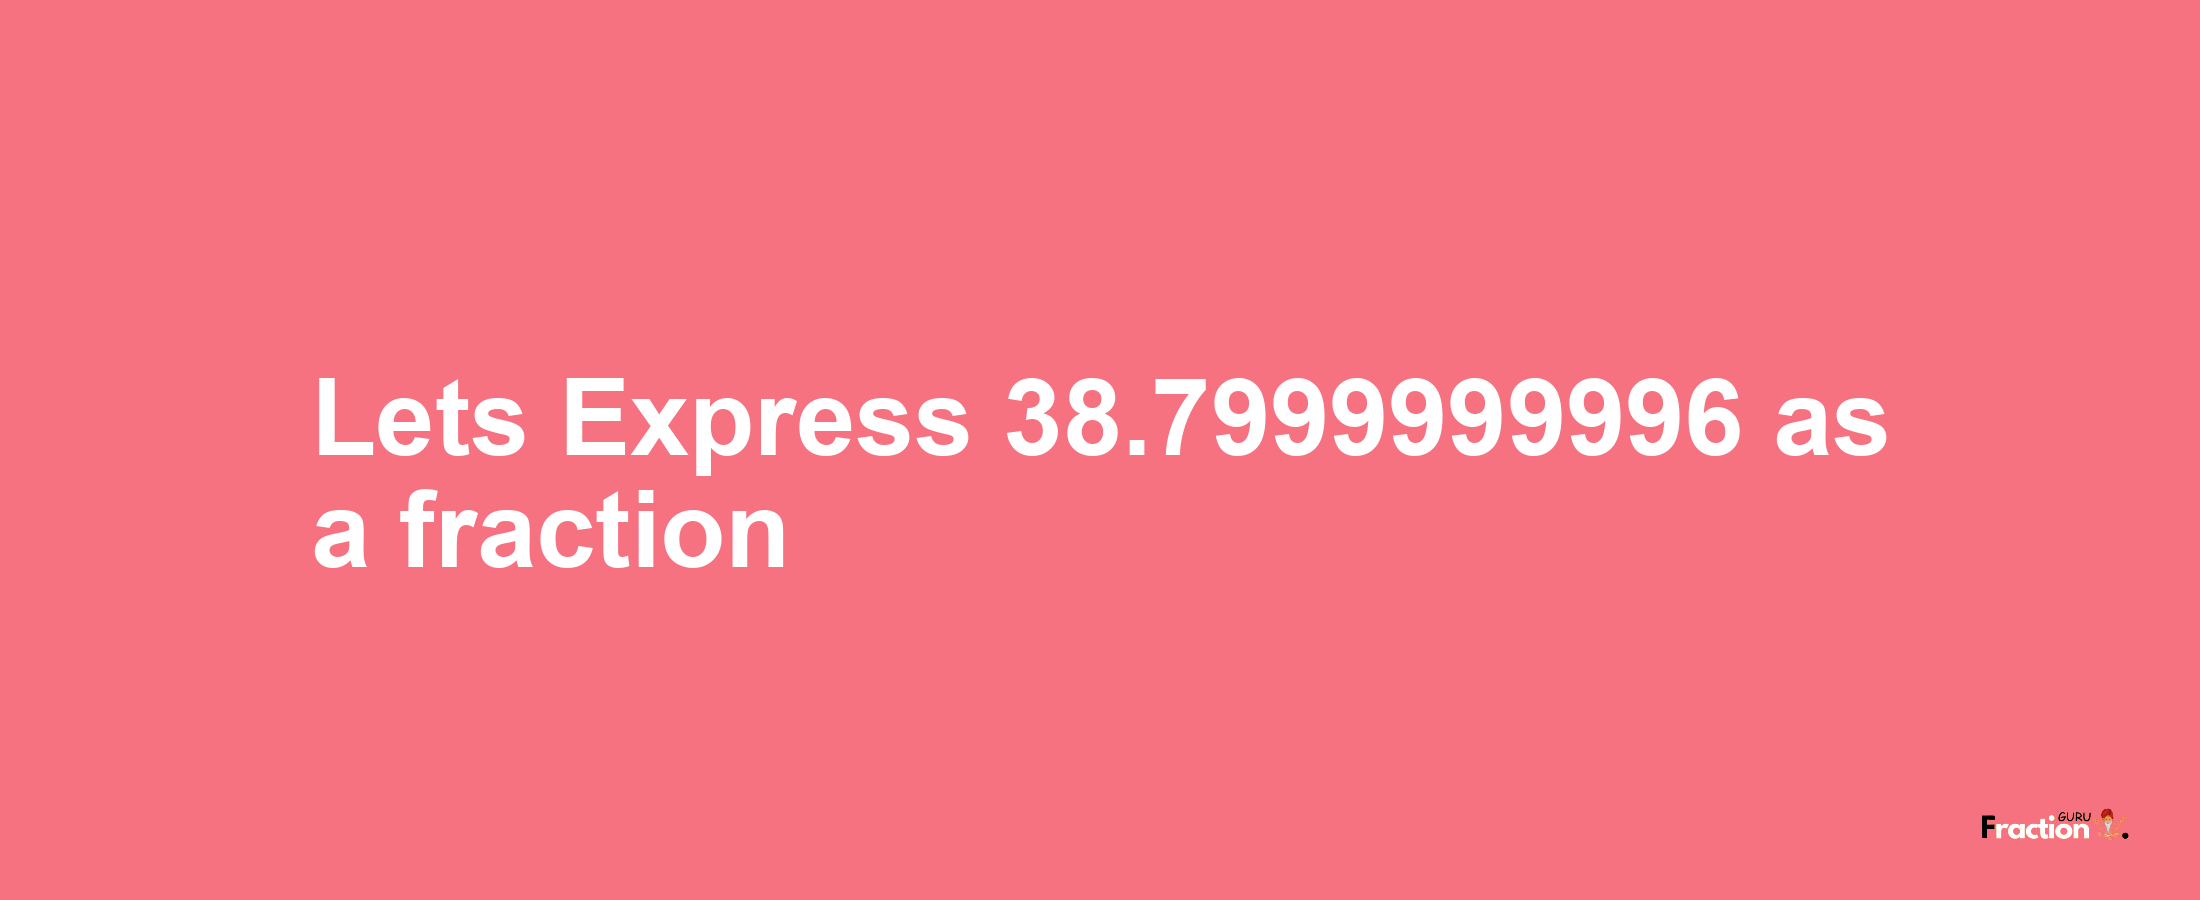 Lets Express 38.7999999996 as afraction